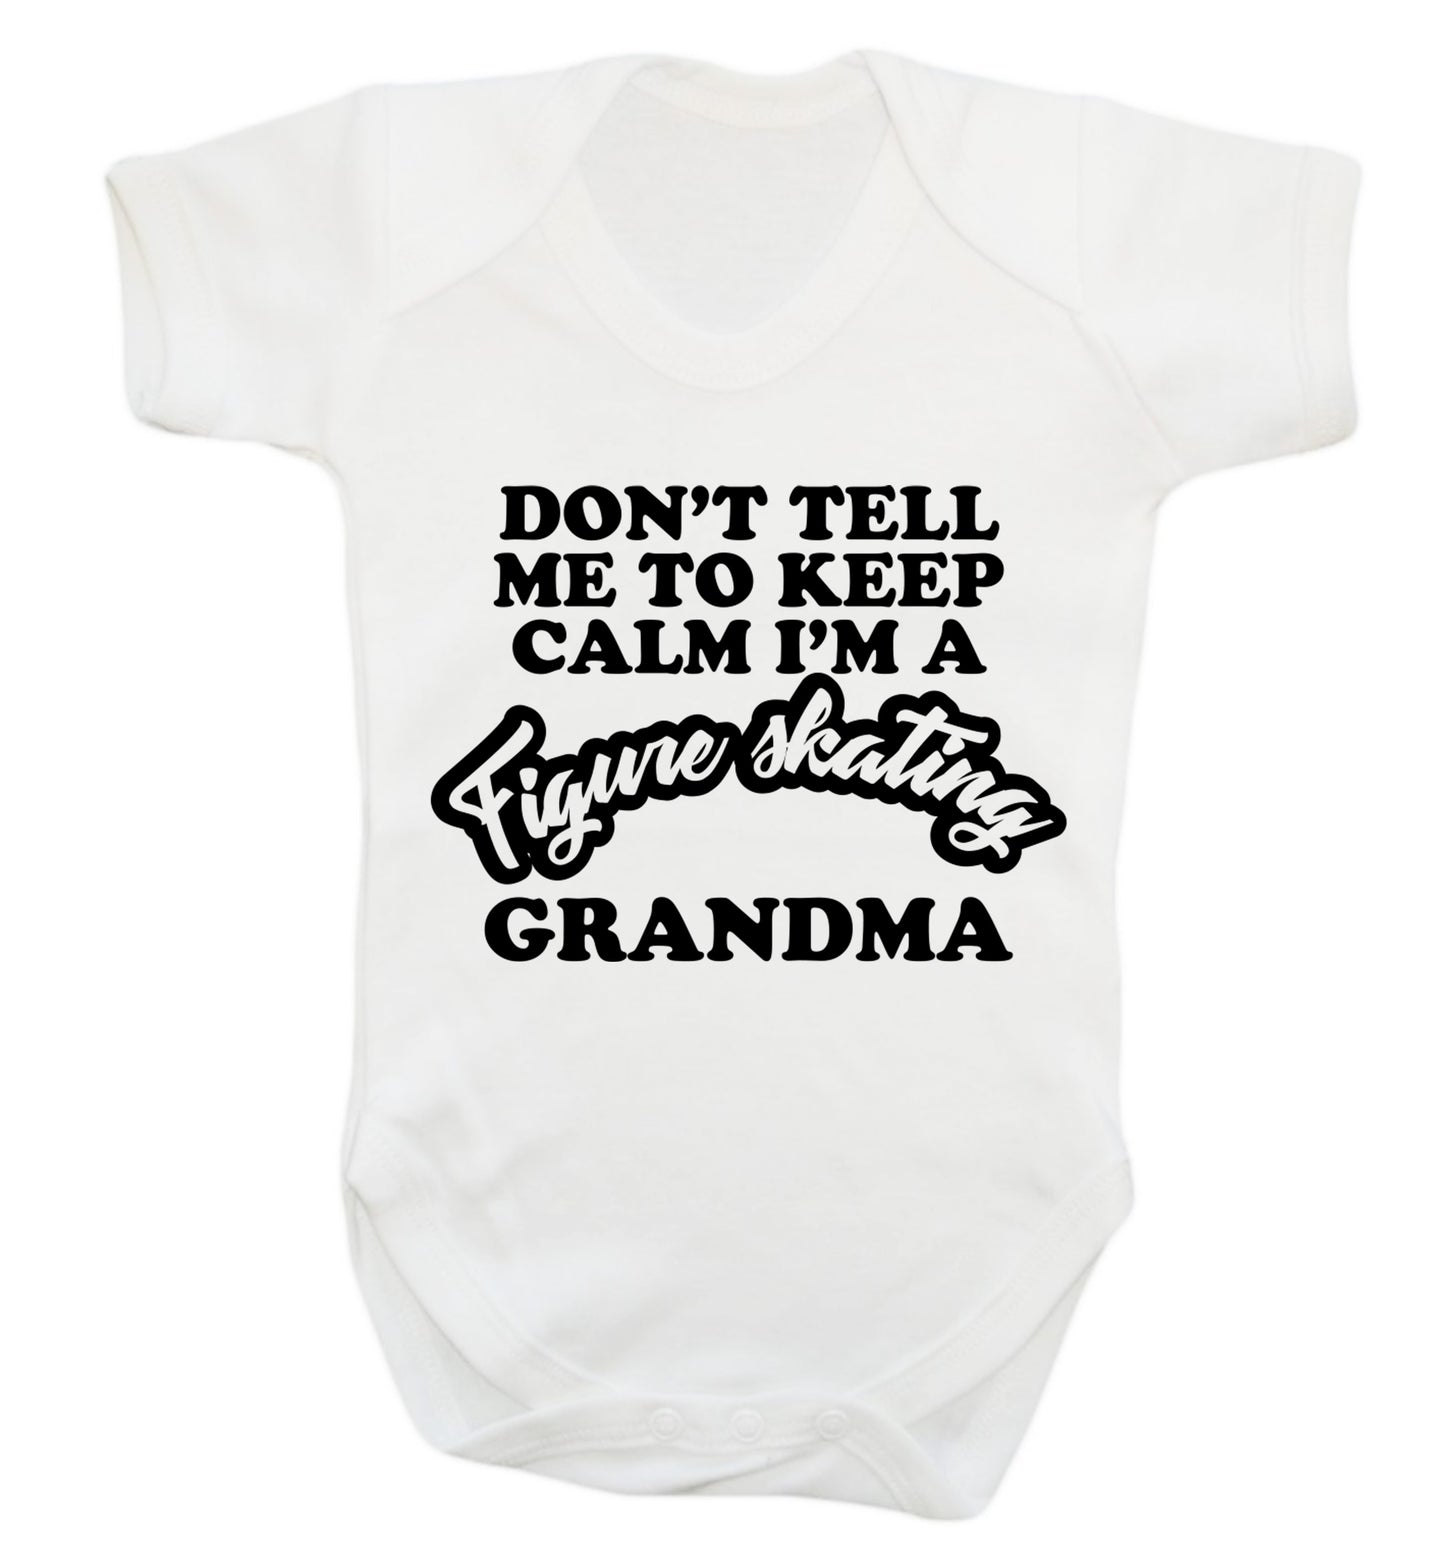 Don't tell me to keep calm I'm a figure skating grandma Baby Vest white 18-24 months